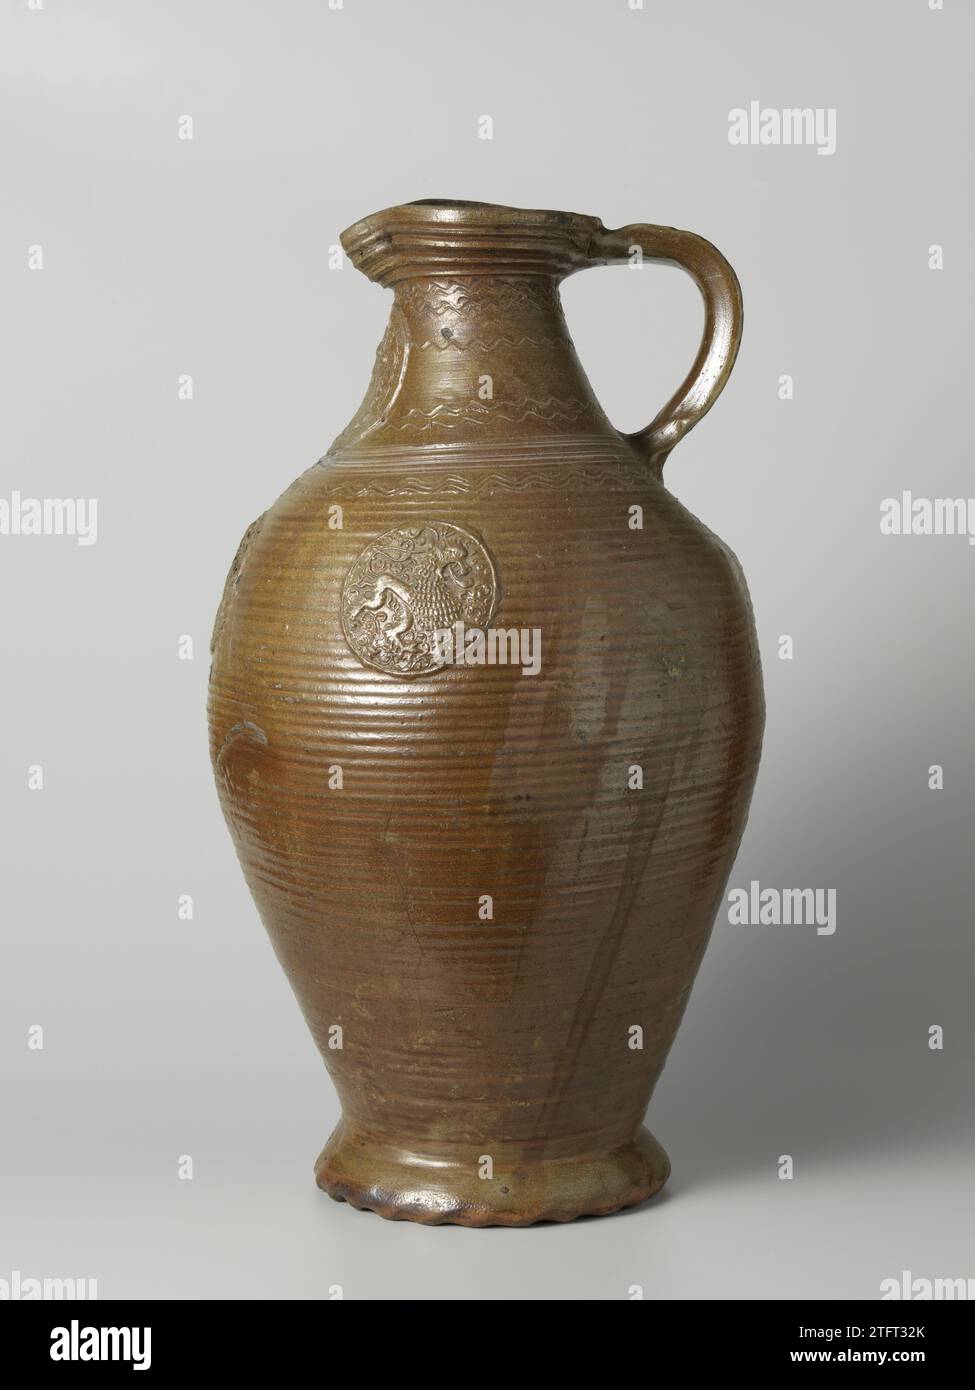 Storrage vessel with a coat of arms and lions, anonymous, 1604 Stock jug of stoneware on wavy base with an egg -shaped body and wide neck with a pinched spout. The C-shaped ear is attached to the neck and shoulder. Profiles on the neck and shoulder. Covered with a brown Engobe. The jug is decorated with turning rings. On the neck in relief a printed and imposed medallion with a weapon and the edge 'I.wilhelmvs.vo.reifenberg m.i.anna vom Batemborg.1604'. The belly with three smaller medallions with a lion, the brand 'W.E.' and the date '1600'. On the neck and shoulder tires with entry, wavy lin Stock Photo